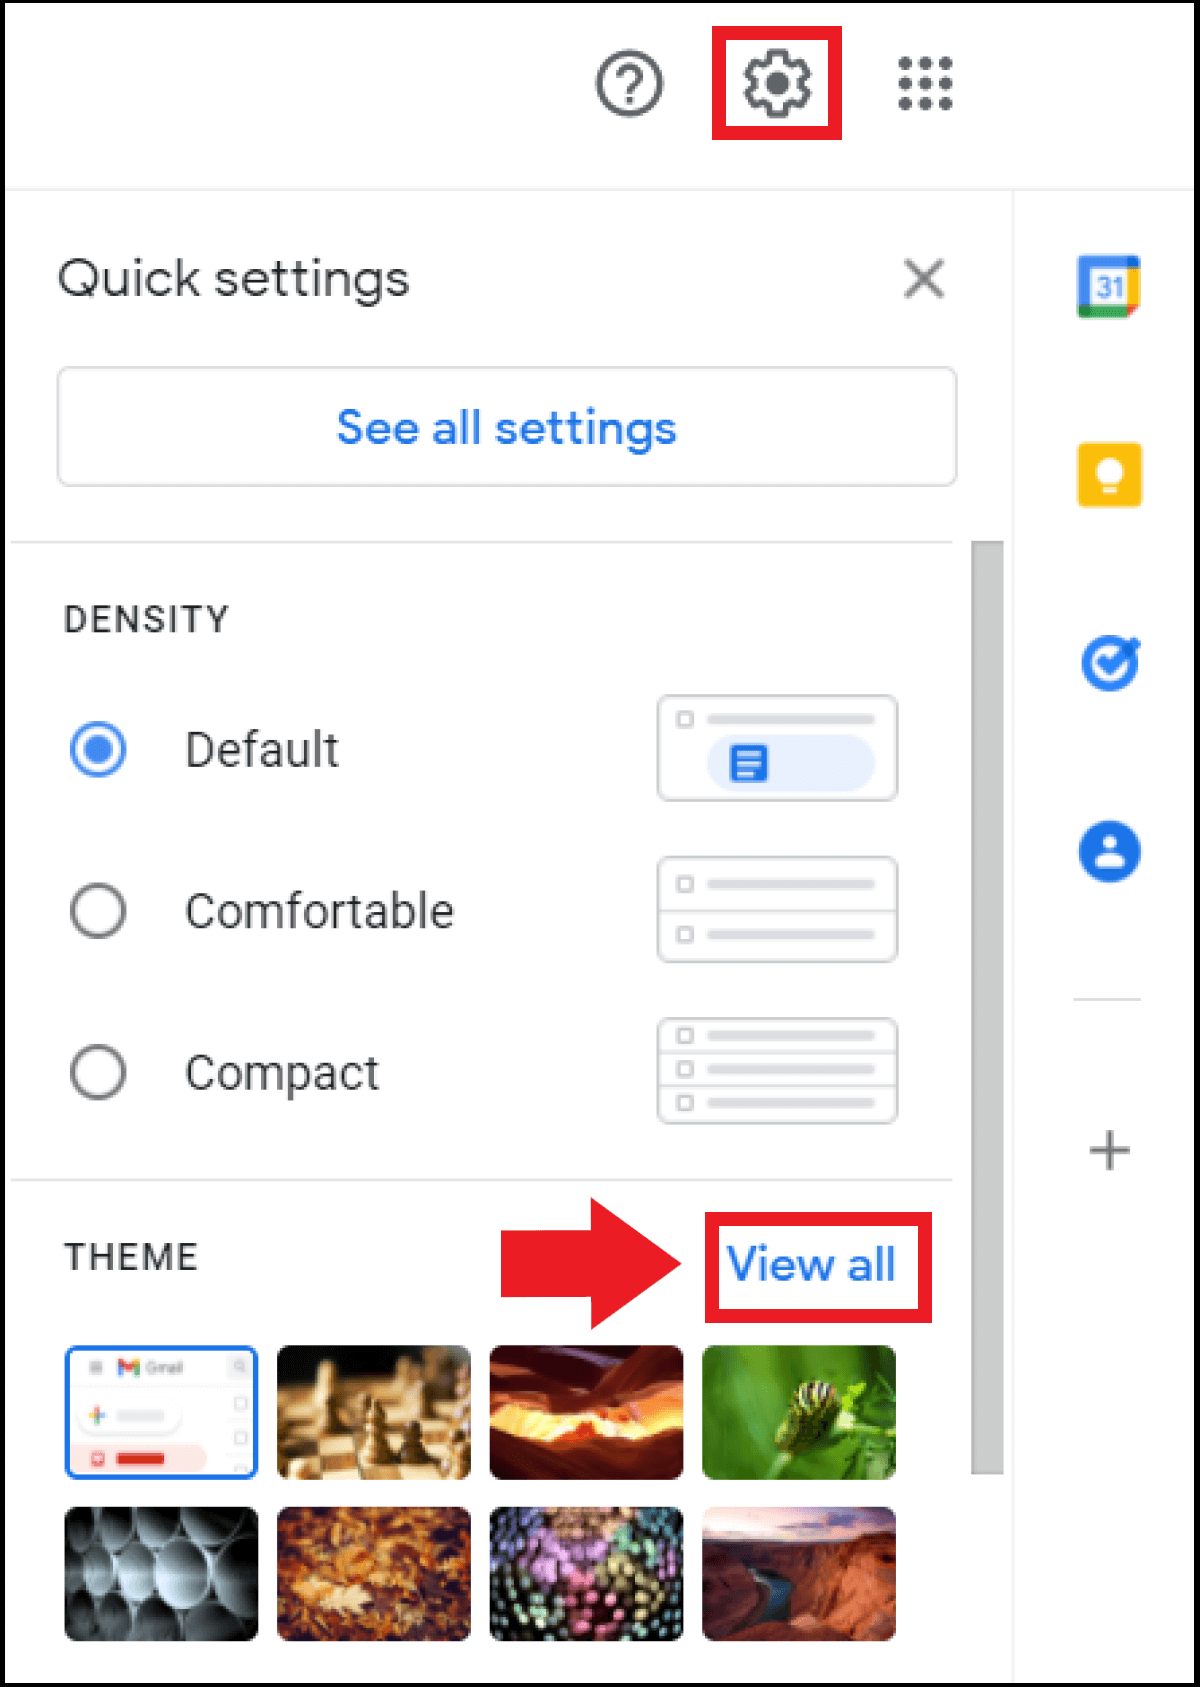 The “Theme” section in Gmail’s quick setting